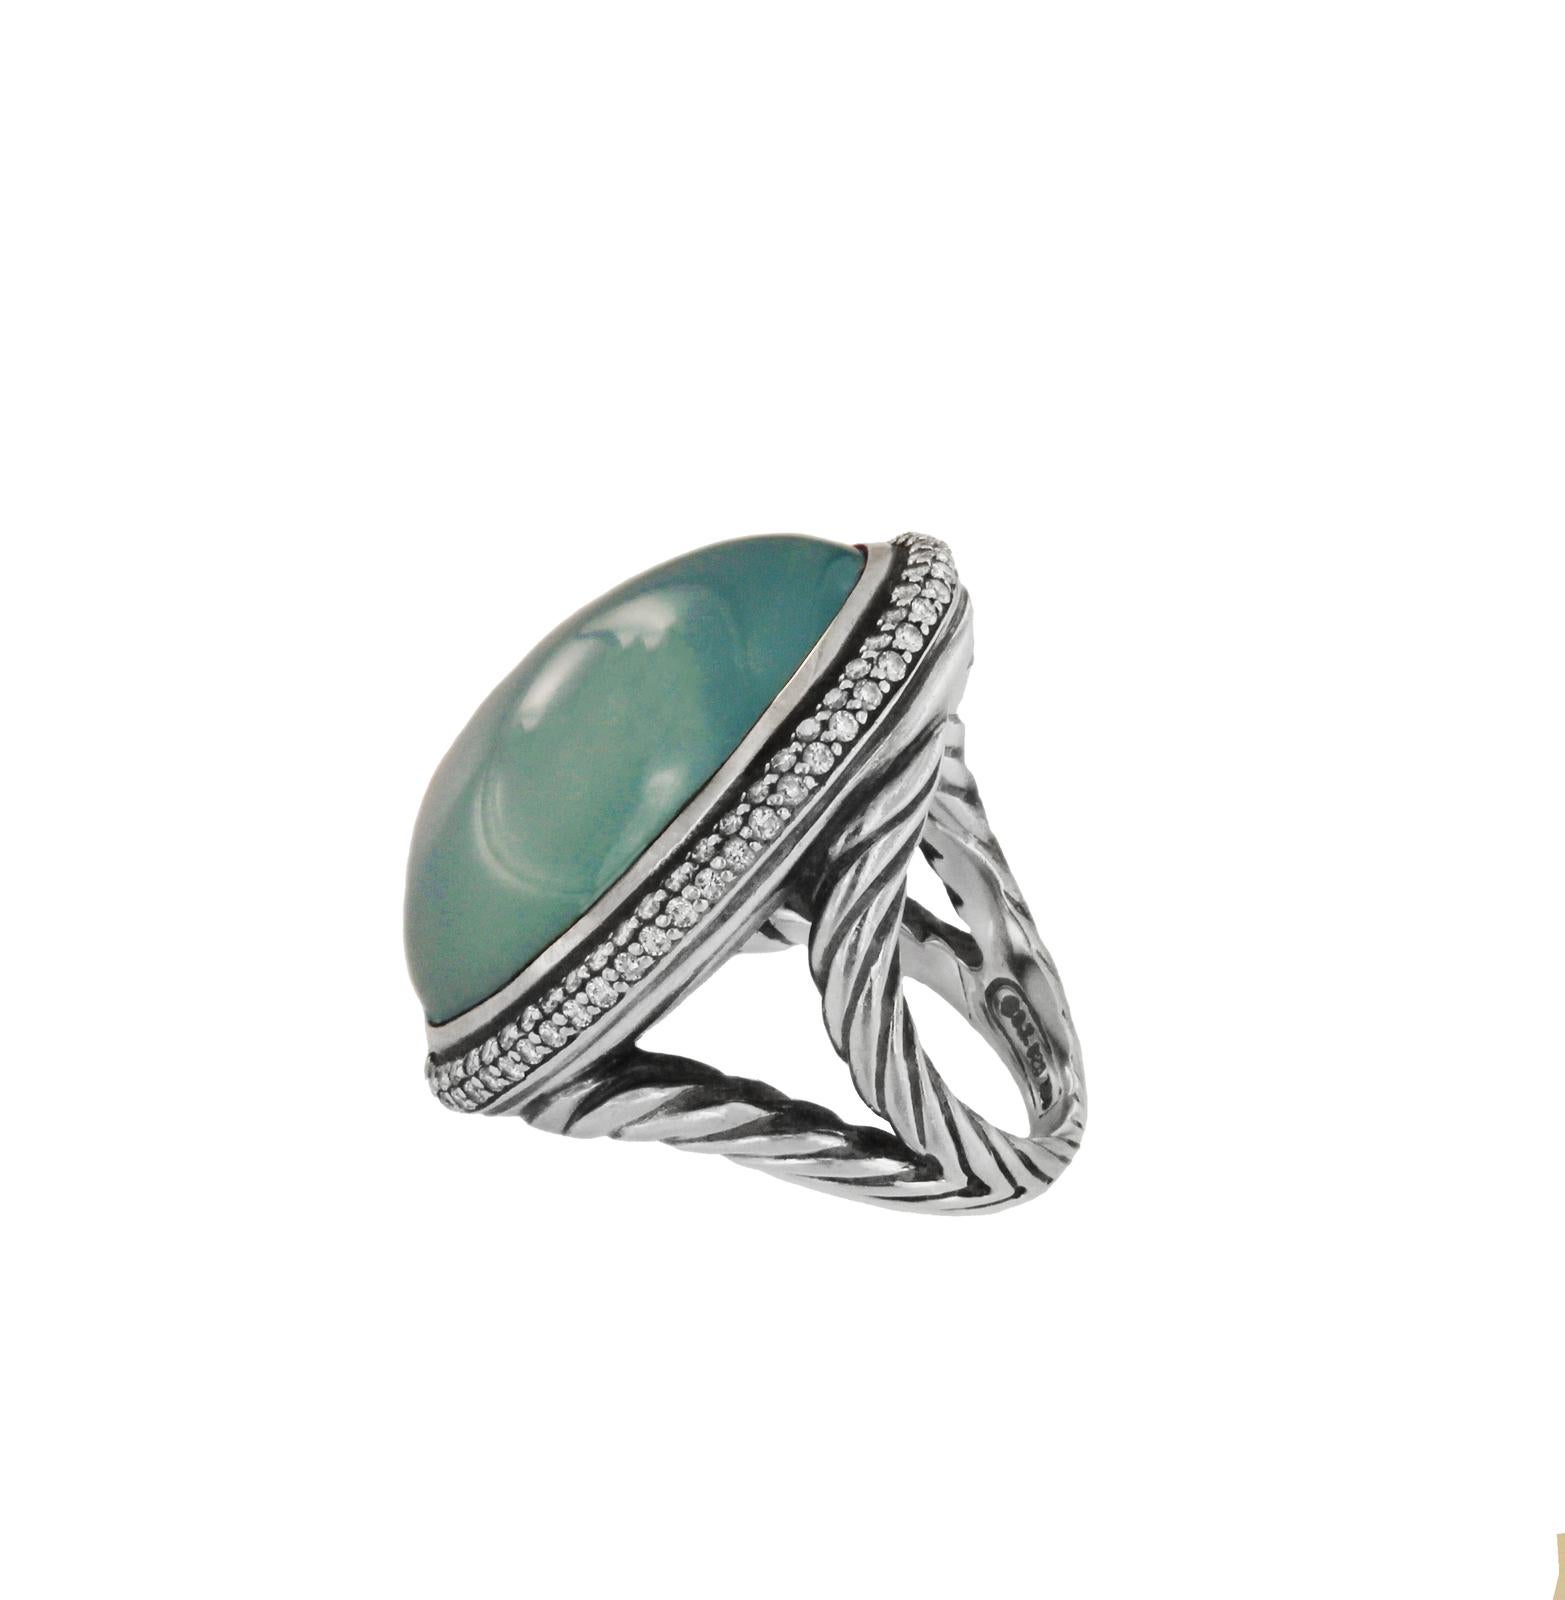 DY OVAL AQUA CHALCEDONY DIAMOND RING.

-Mint condition
-Sterling silver
-Ring size: 7
-Chalcedony dimension: 21x29mm

*Comes with David Yurman pouch.